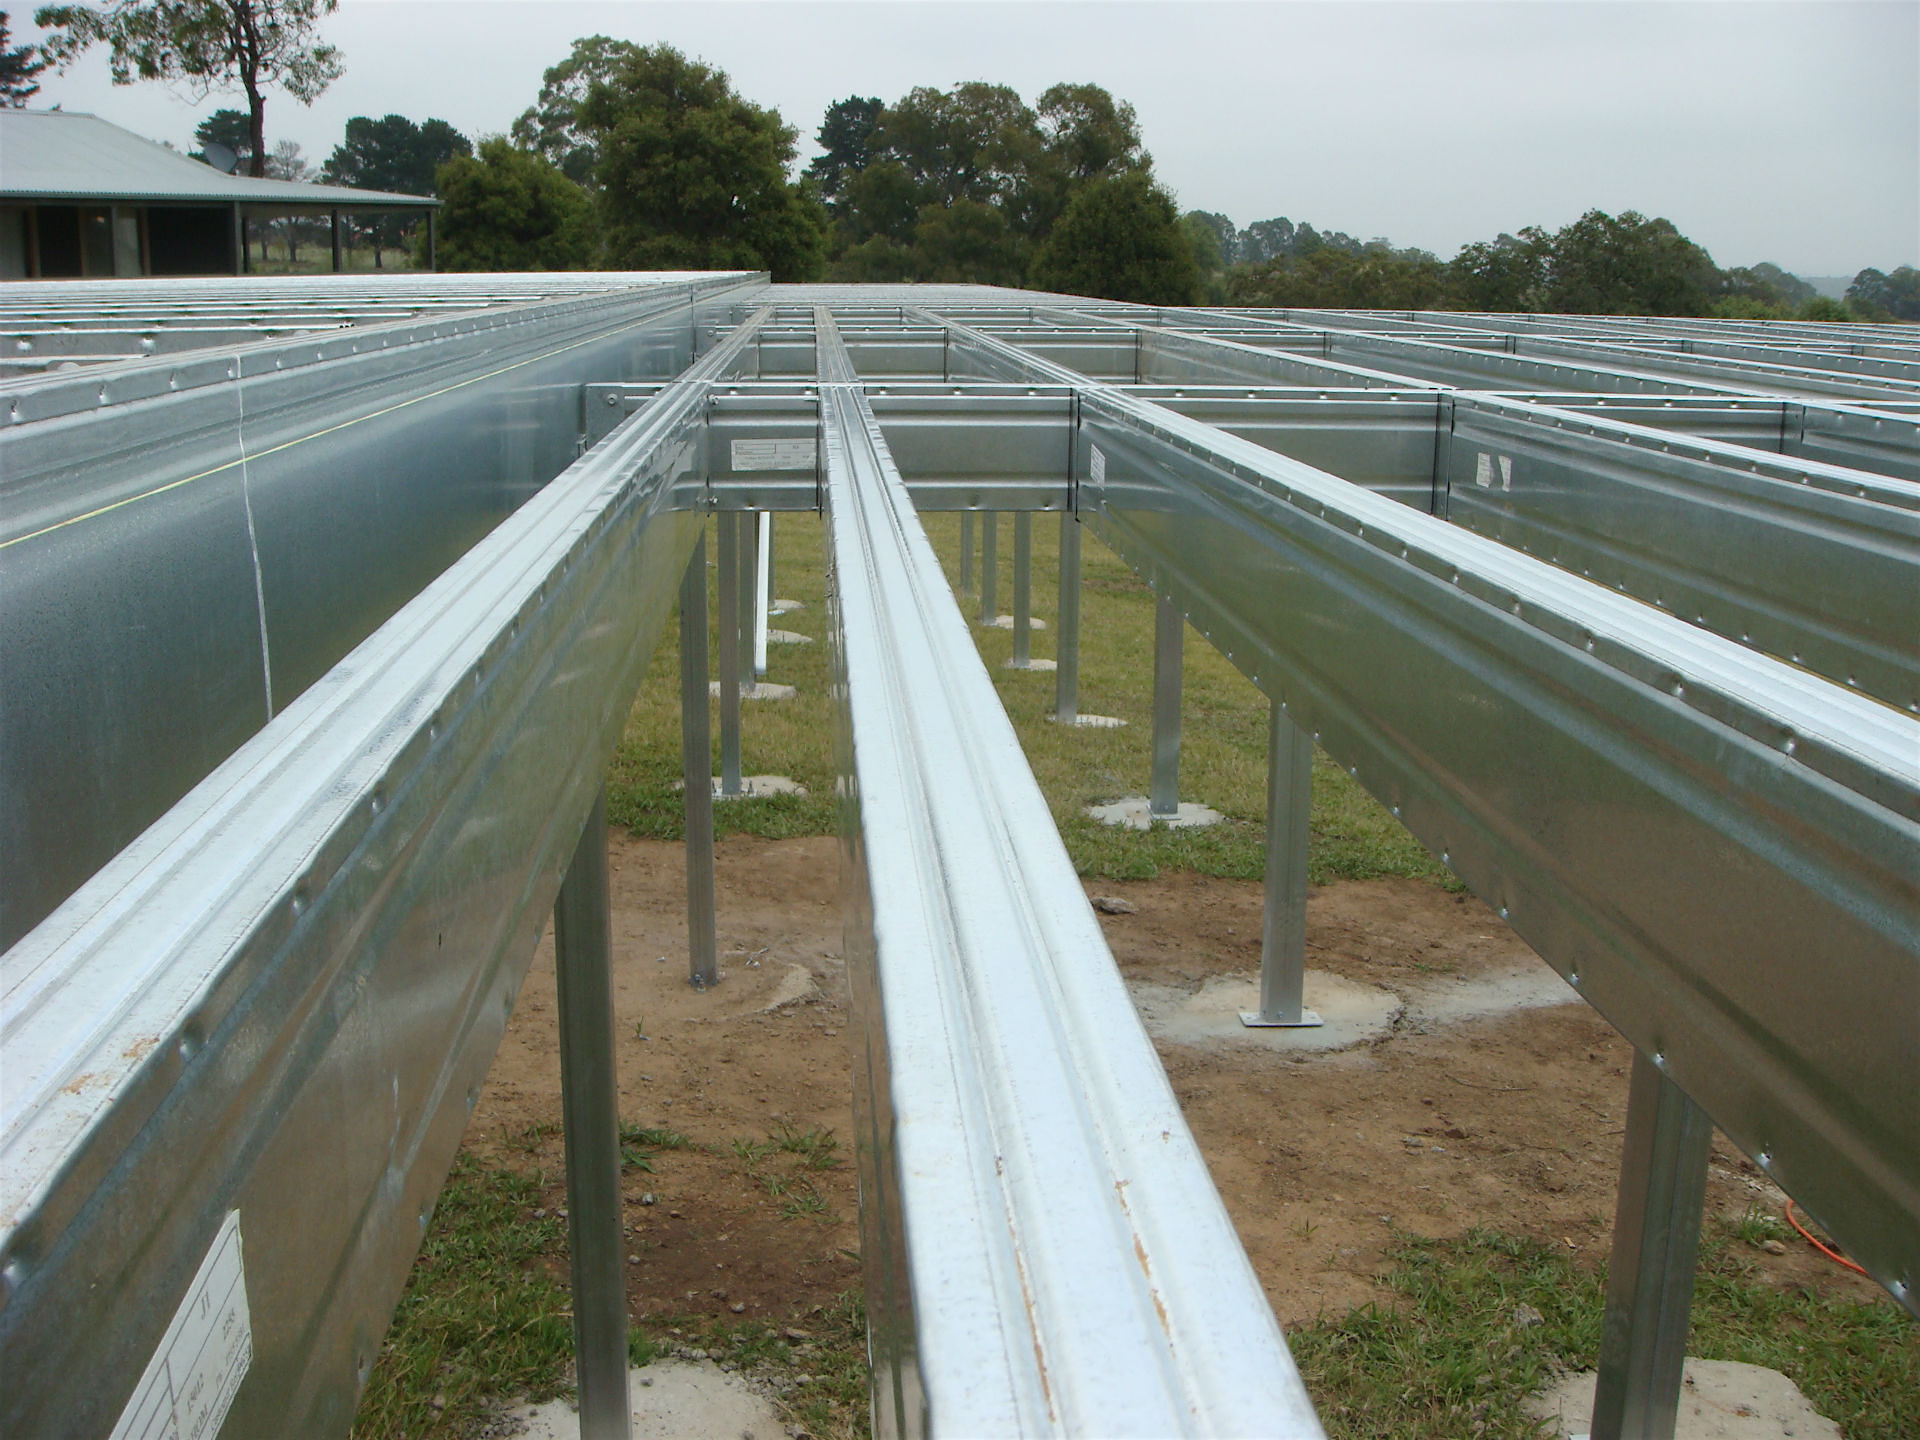 Boxspan steel framing provides a straight and true floor frame